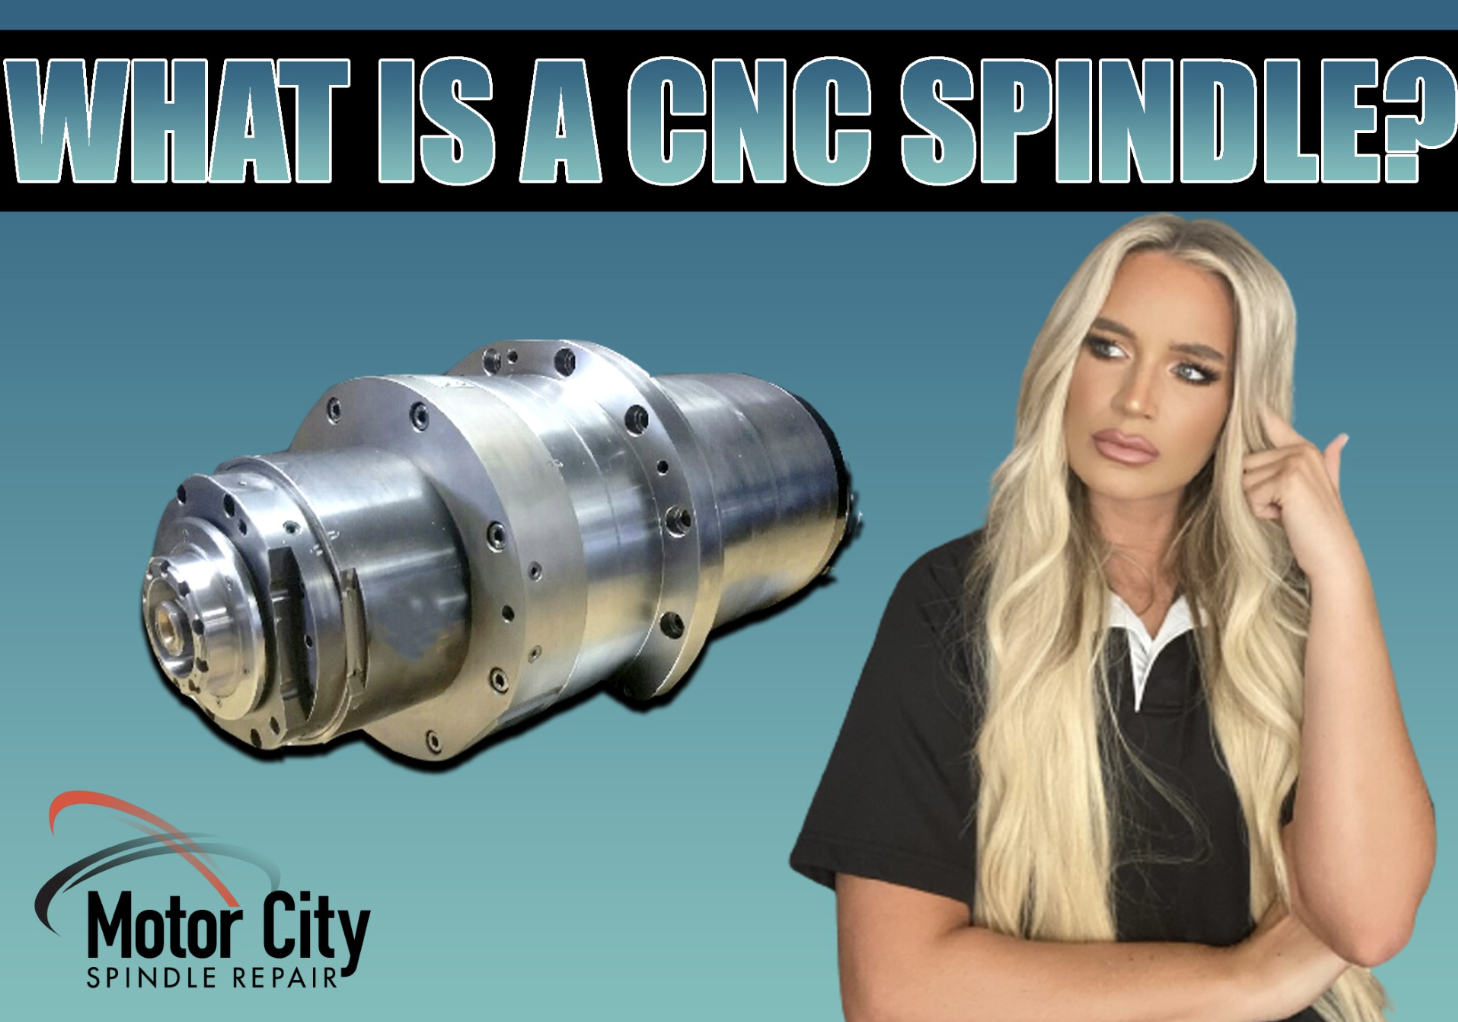 What Is a CNC Spindle & How Does It Function? - Superior Spindle